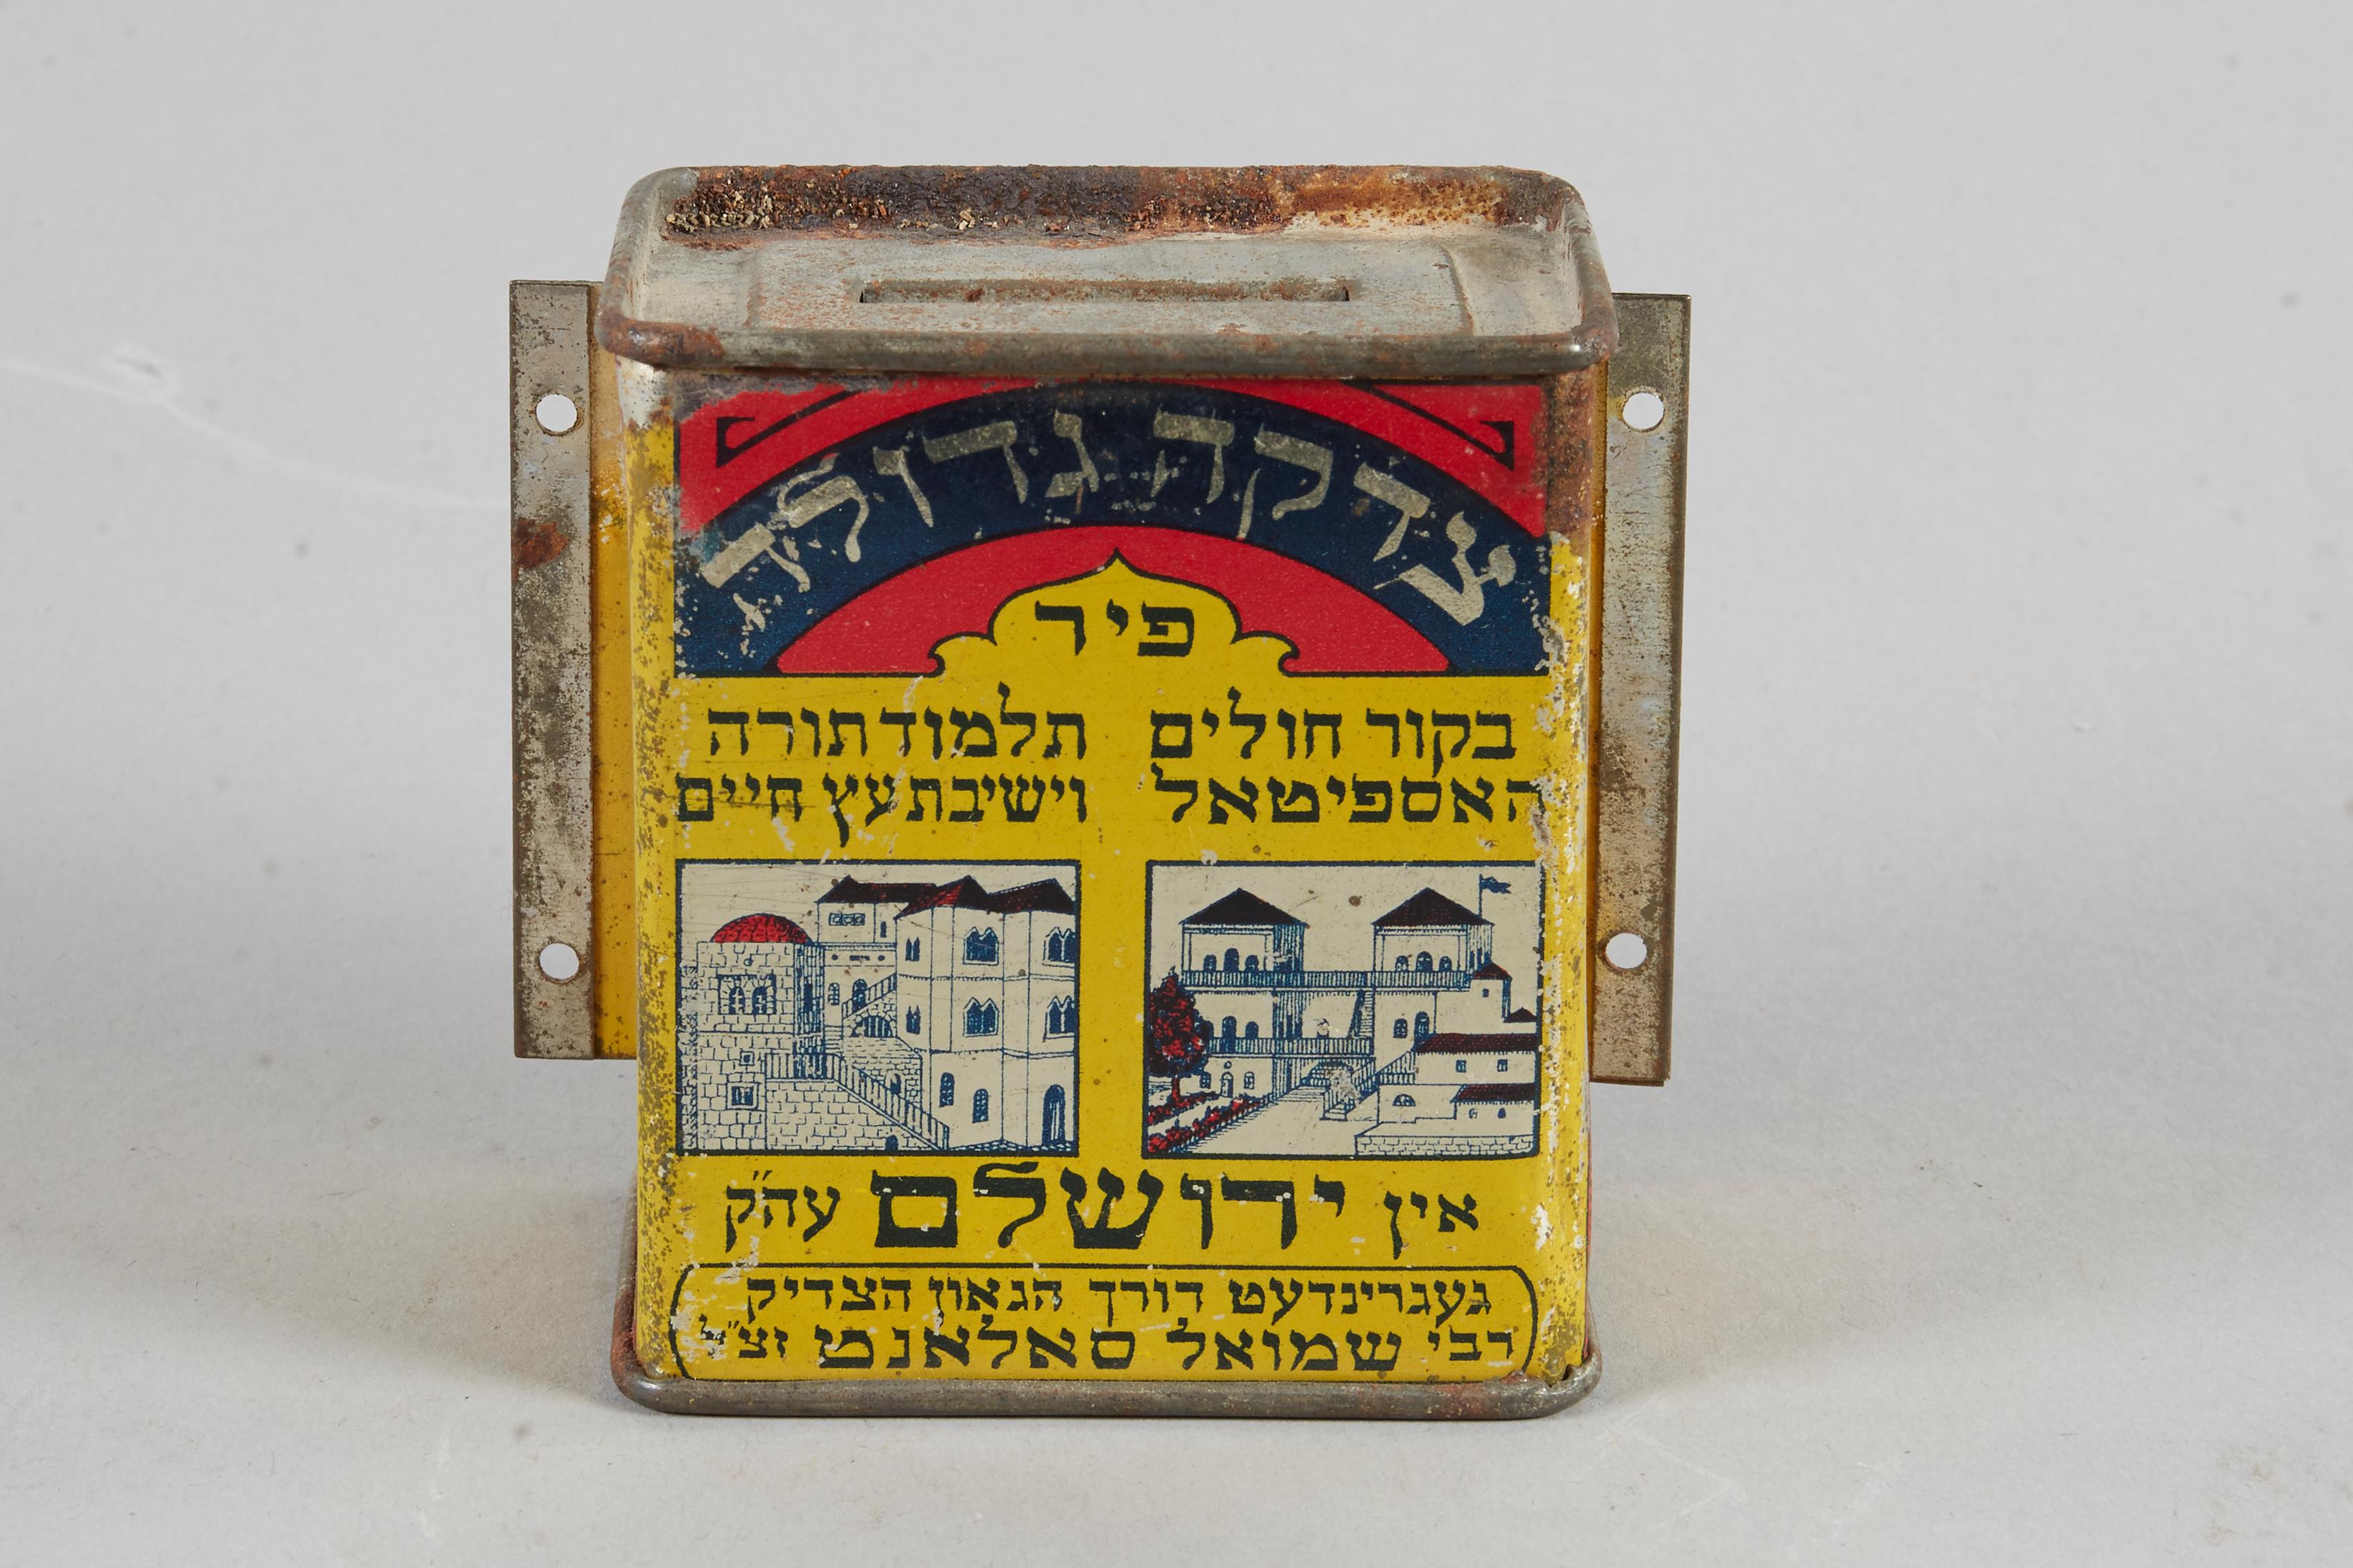 Colorful Tzedaka (Jewish Charity) Box made in Jerusalem, circa 1940. 
Designed by the Bezalel teacher artist Alfred Zaltsman, whose name appears on the side of the box. The box was distributed to donors in Mandatory Palestine as well as in the USA